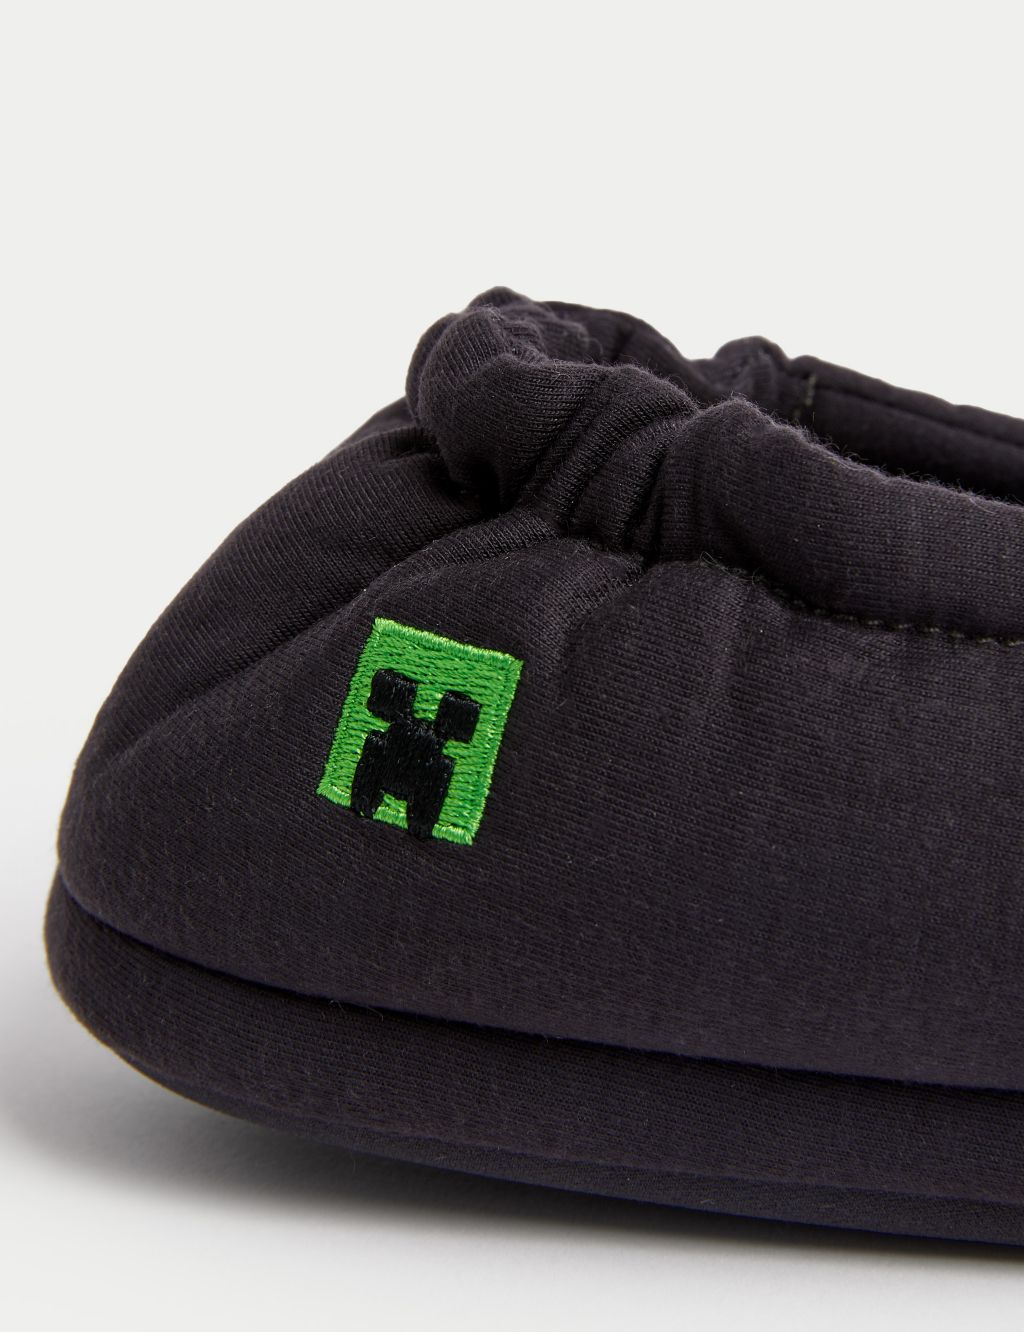 Kids' Minecraft™ Slippers (13 Small - 7 Large) image 3